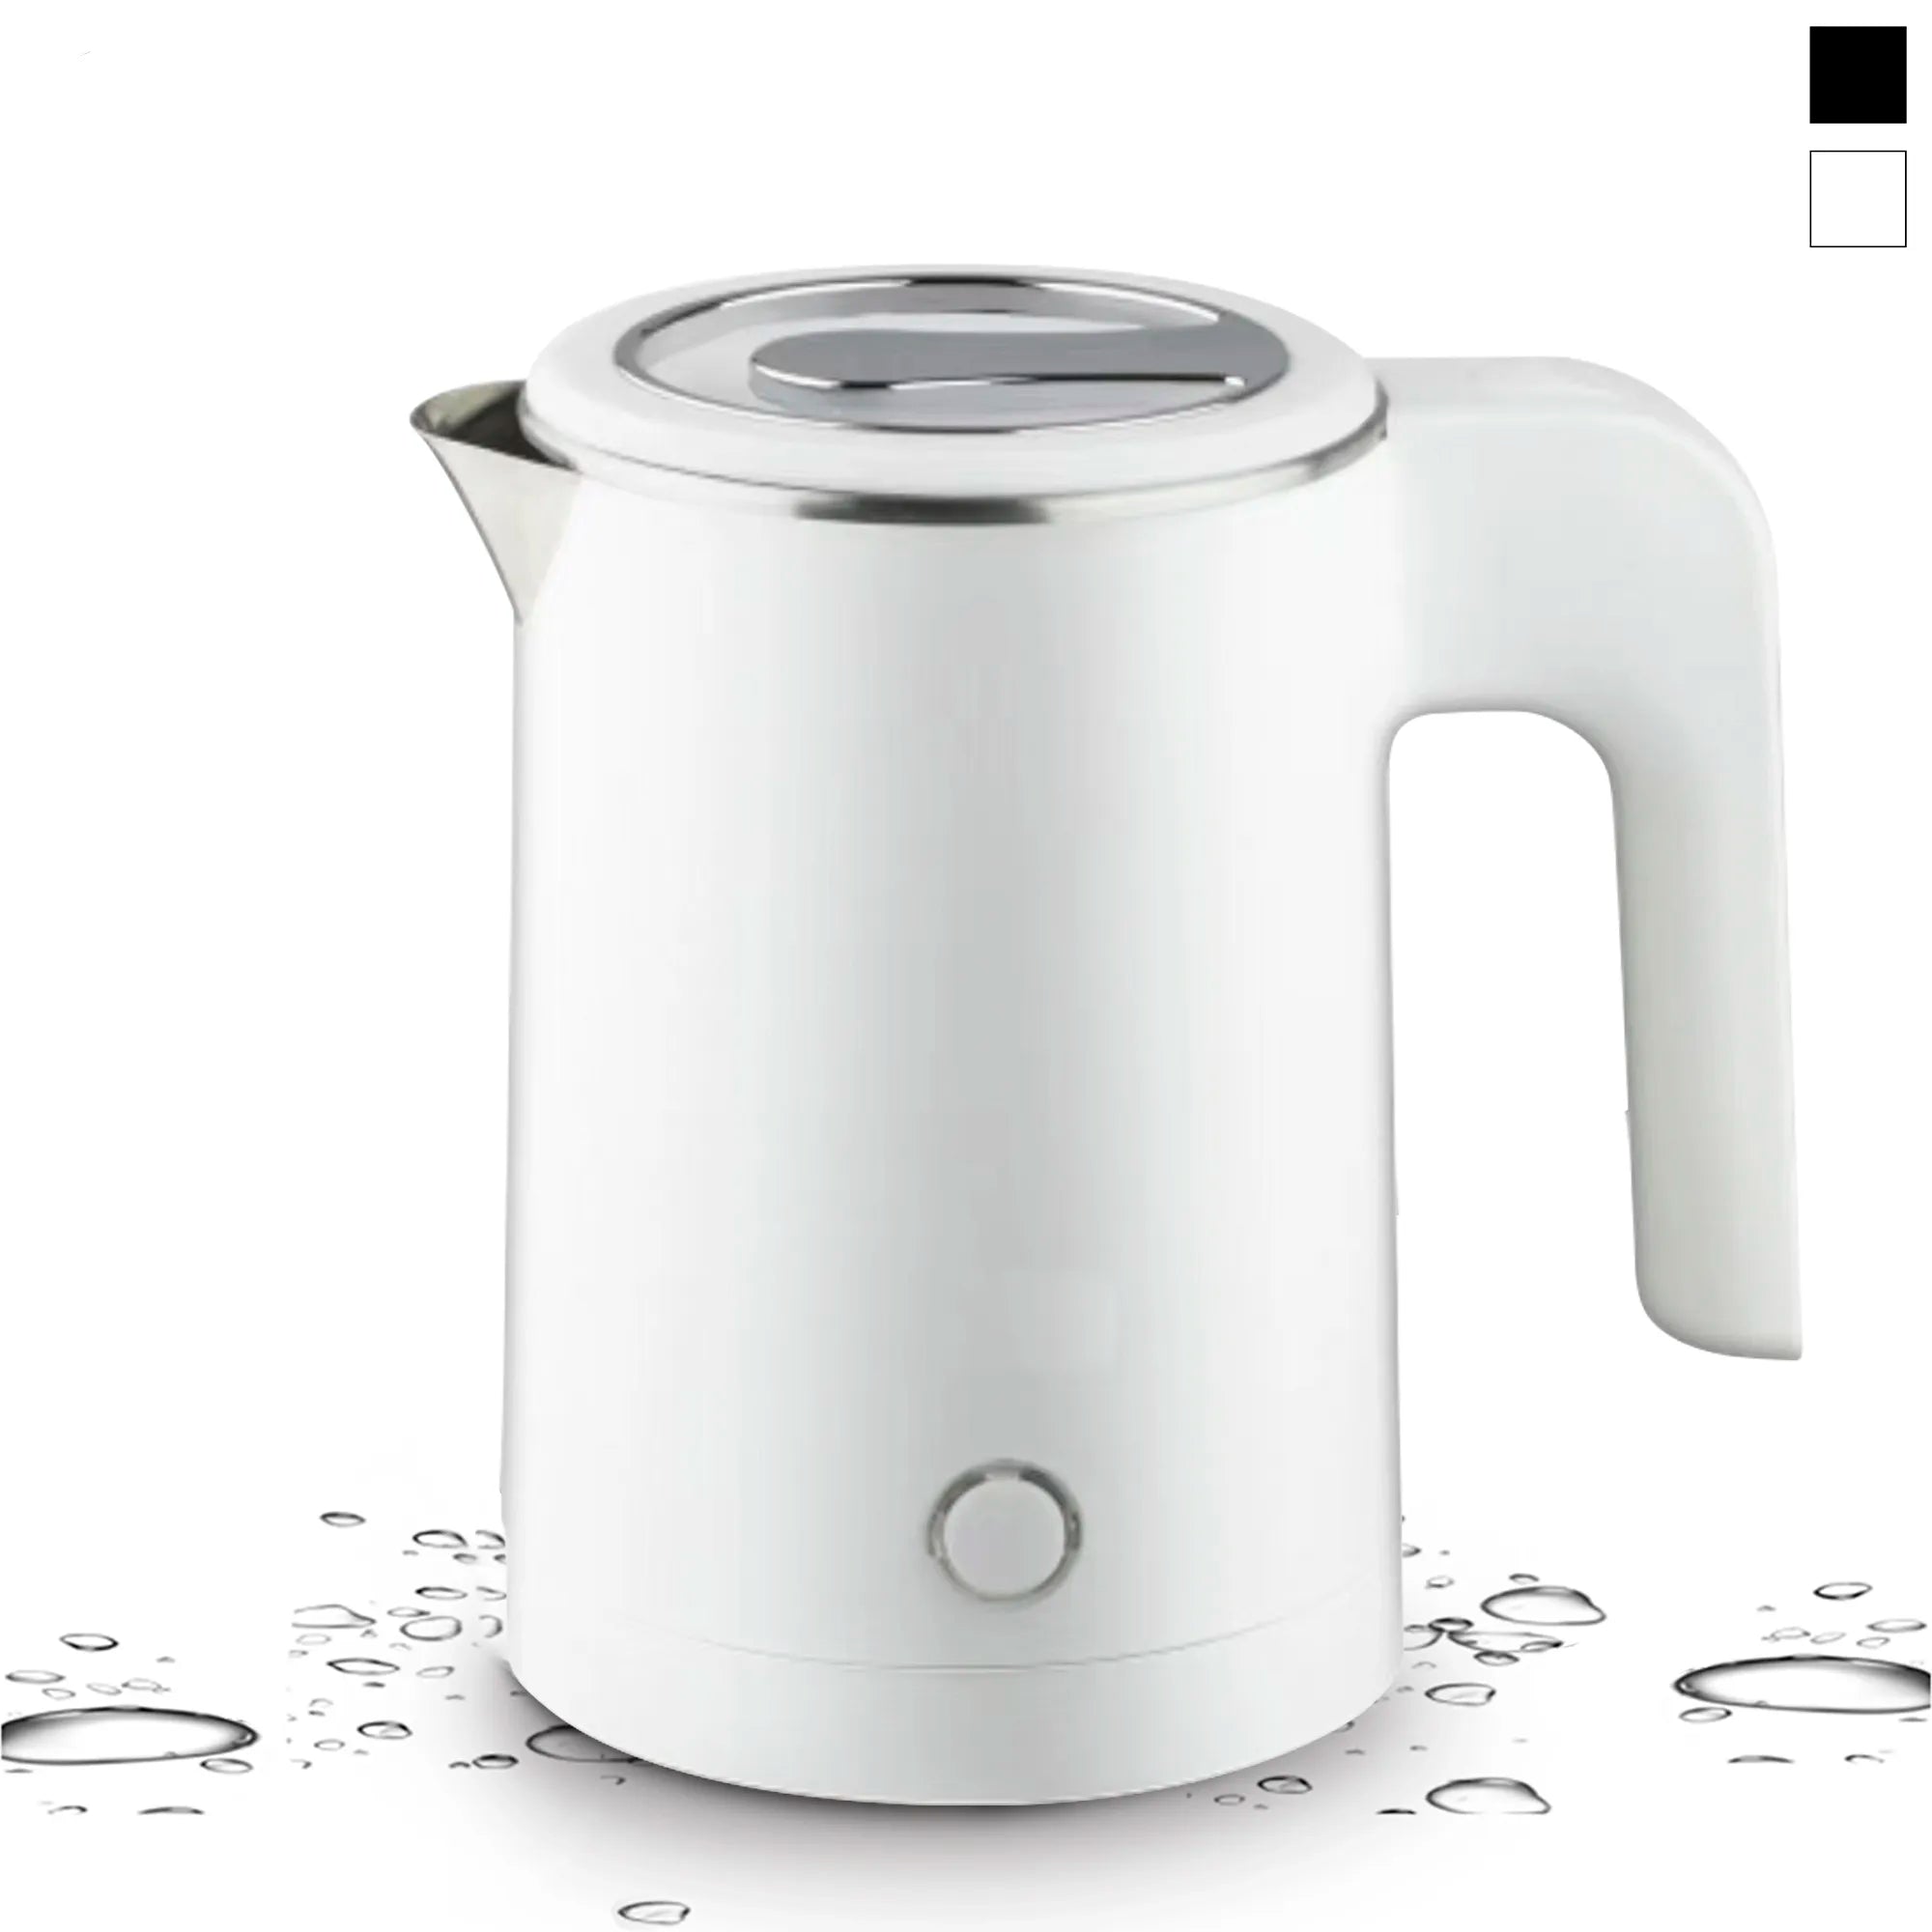 Travel Electric Kettle Tea Coffee 0.8L Stainless Steel Portable